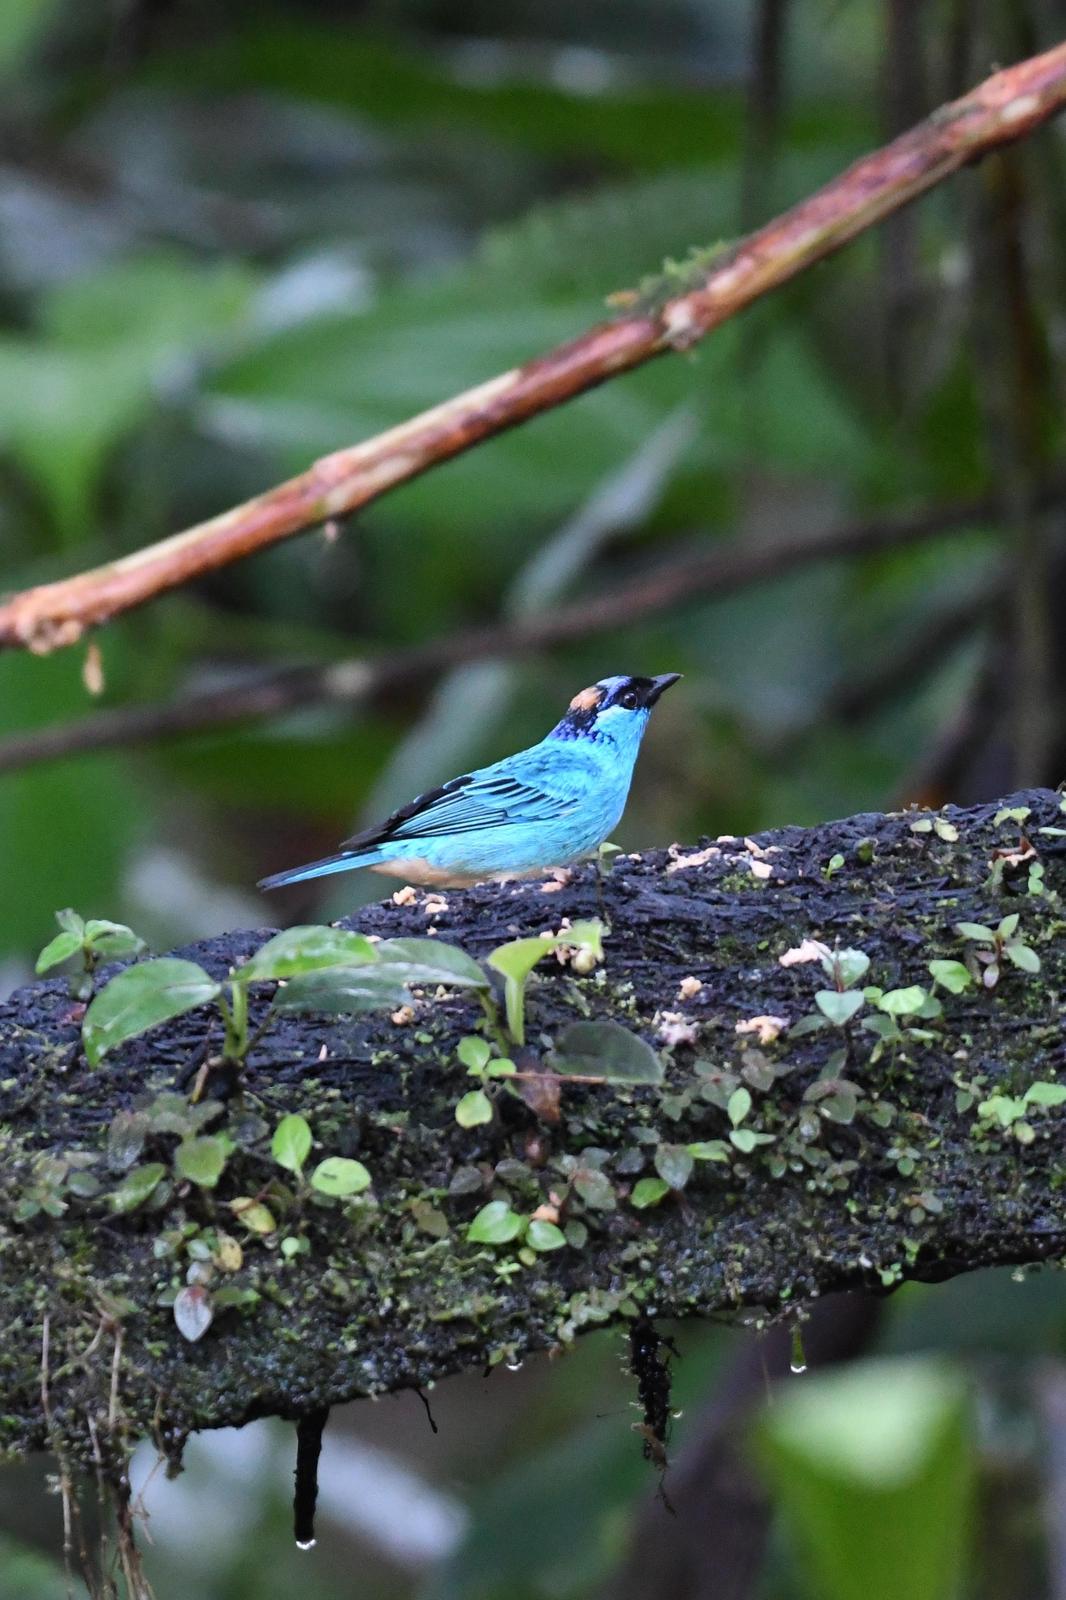 Golden-naped Tanager Photo by Ann Doty